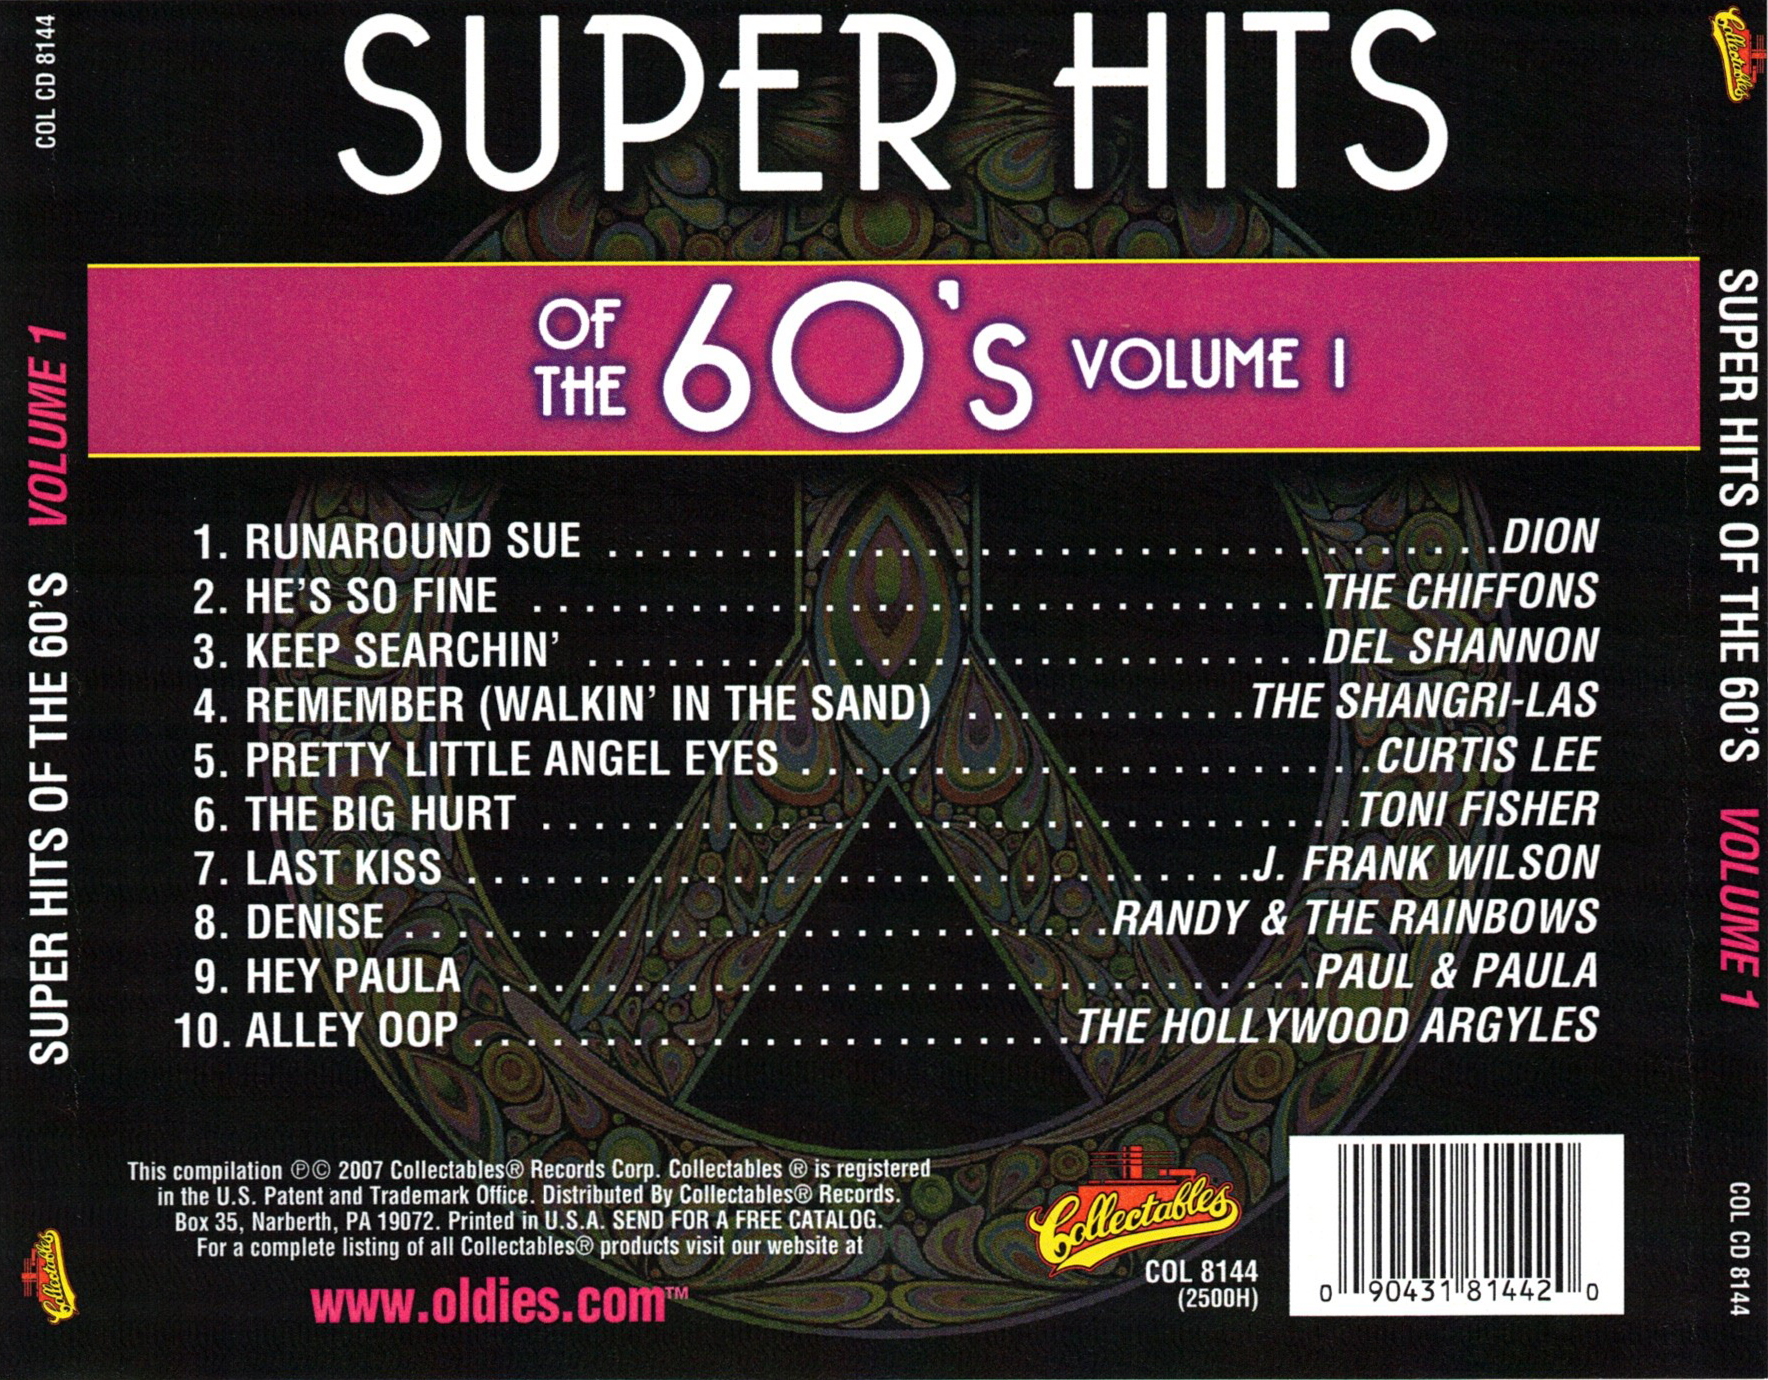 Super Hits Of The 60's, Volume 1